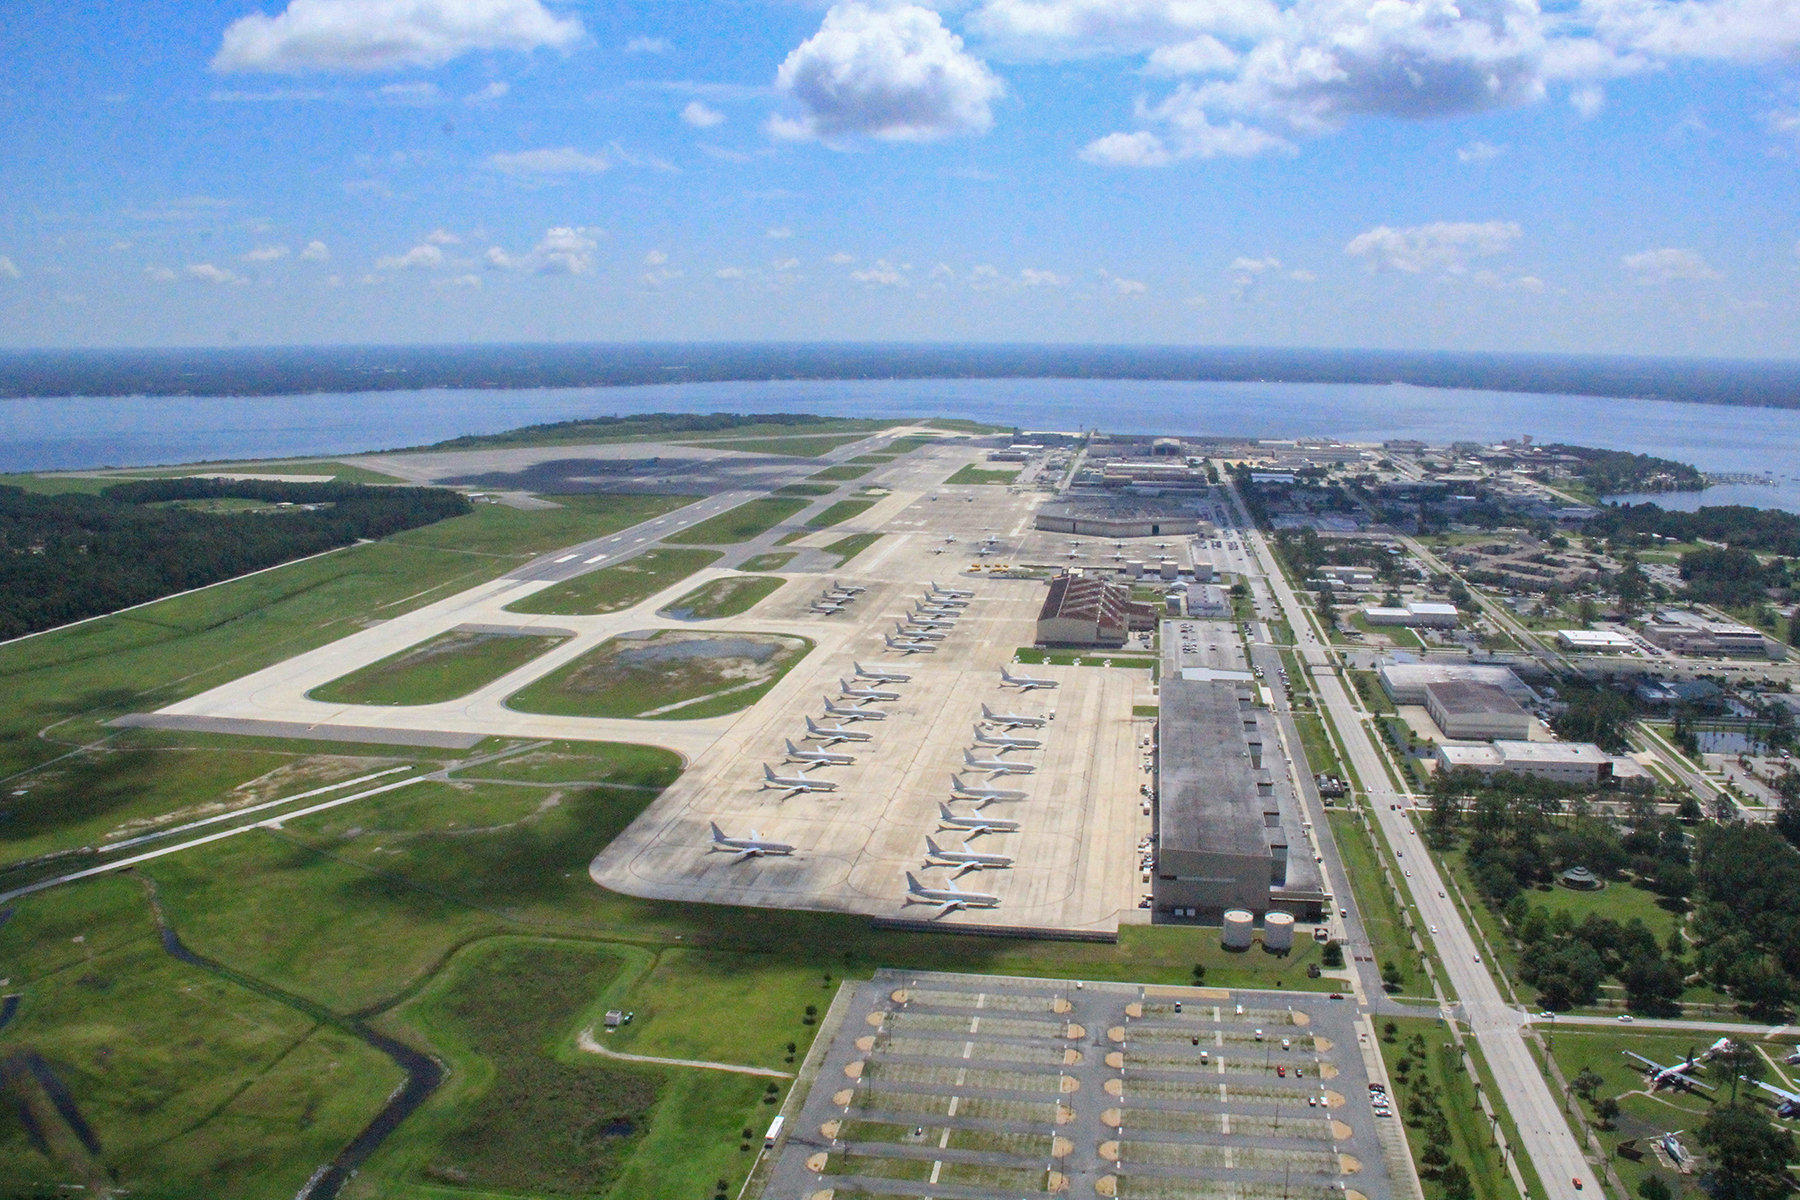 JACKSONVILLE, Fla. (May 20, 2018) An aerial view of Naval Air Station (NAS) Jacksonville. NAS Jacksonville is comprised of 28,000 acres of land which includes the air station, Outlying Field Whitehouse, and the Pinecastle Range Complex. NAS Jacksonville recently received encroachment funds to protect the installation's assets with incompatible development through restrictive easements. (U.S. Navy photo)